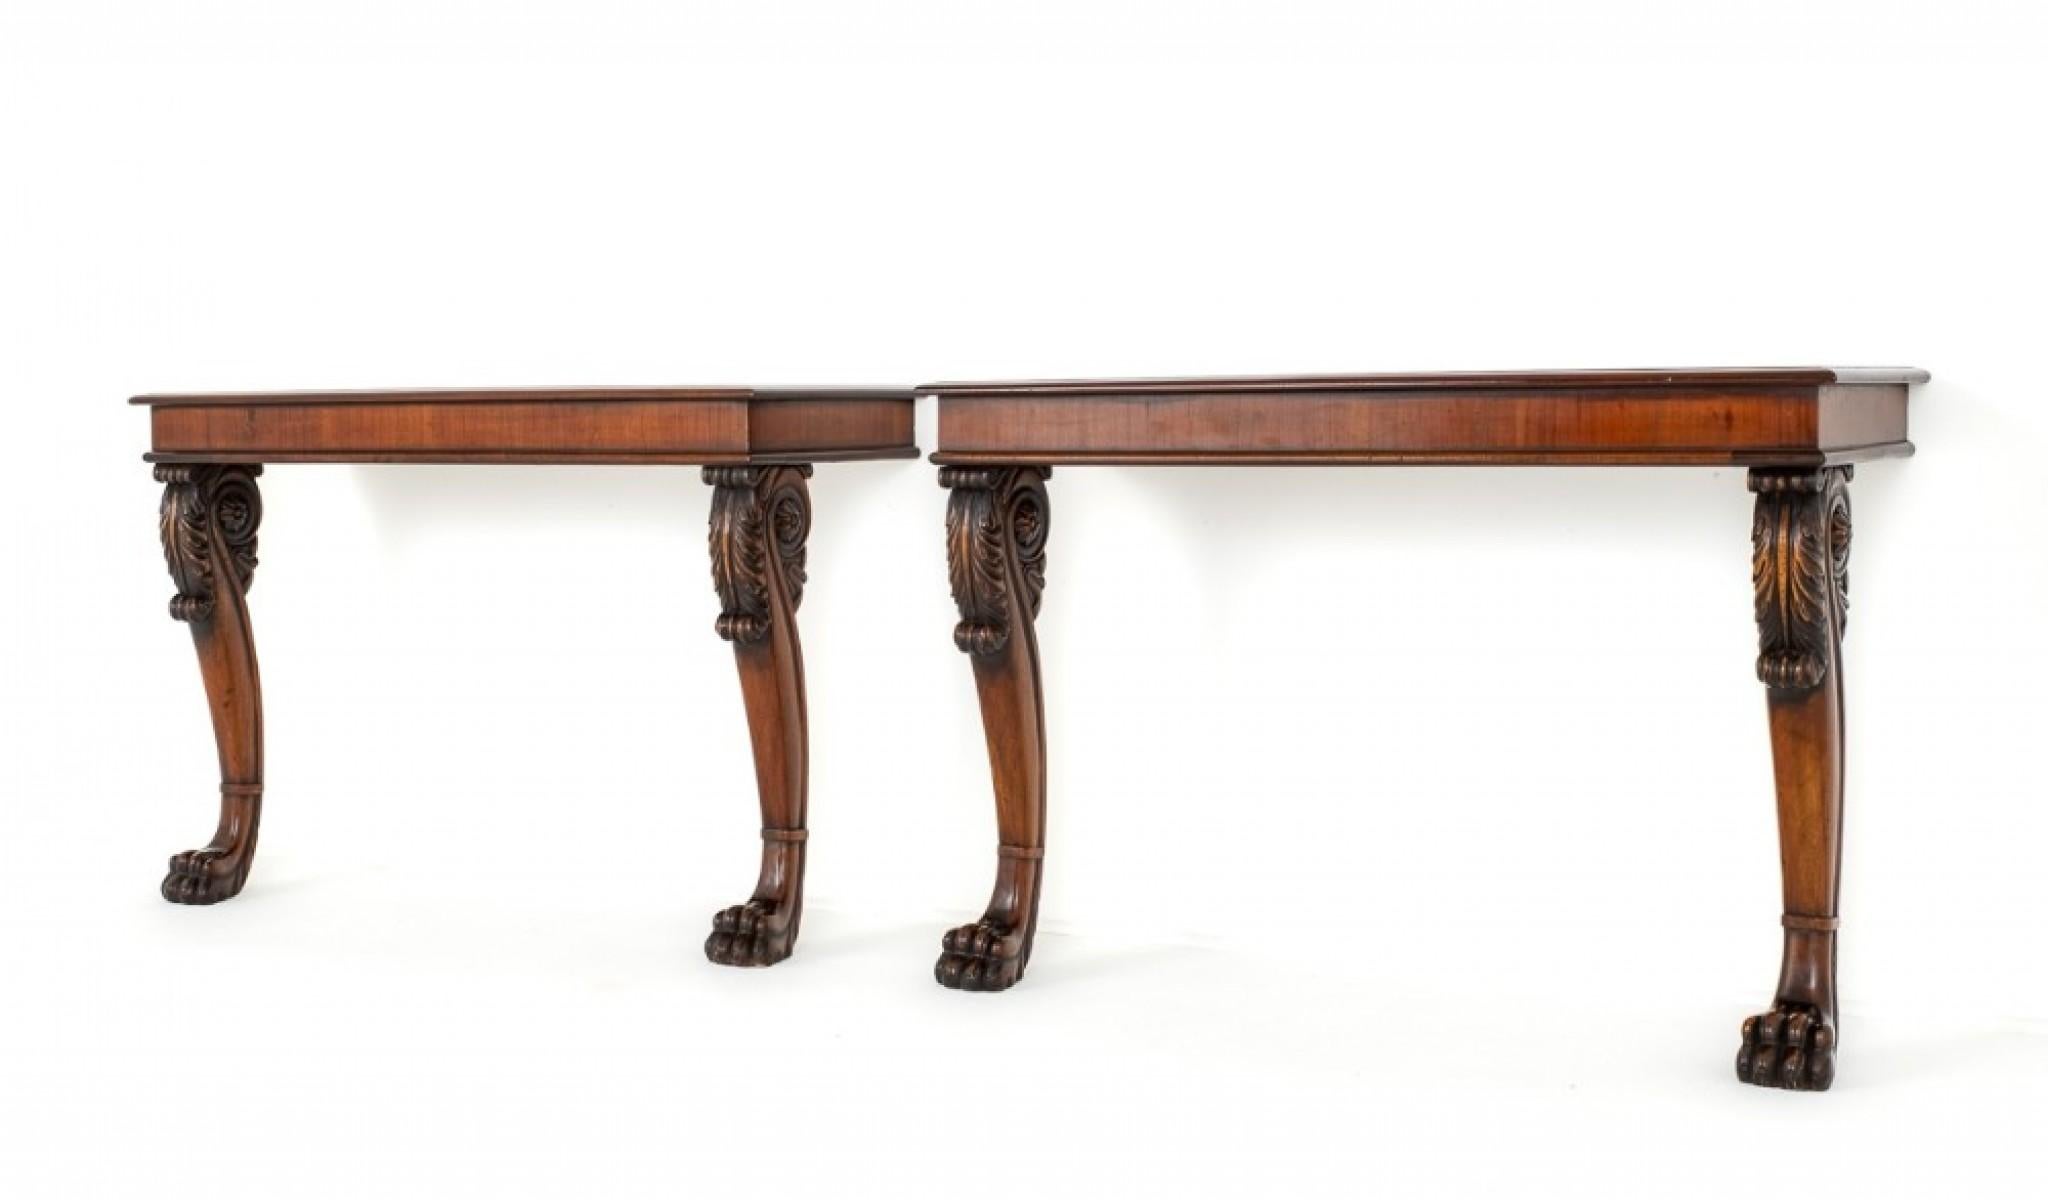 Pair of Georgian Revival Mahogany Console Tables.
circa 1880
These console Tables Feature Scroll Front Legs With Lions Paw Feet.
The Knees Feature Carved Acanthus Leaves.
These Lovely Tables would Grace any Home.
Presented in Good Condition.